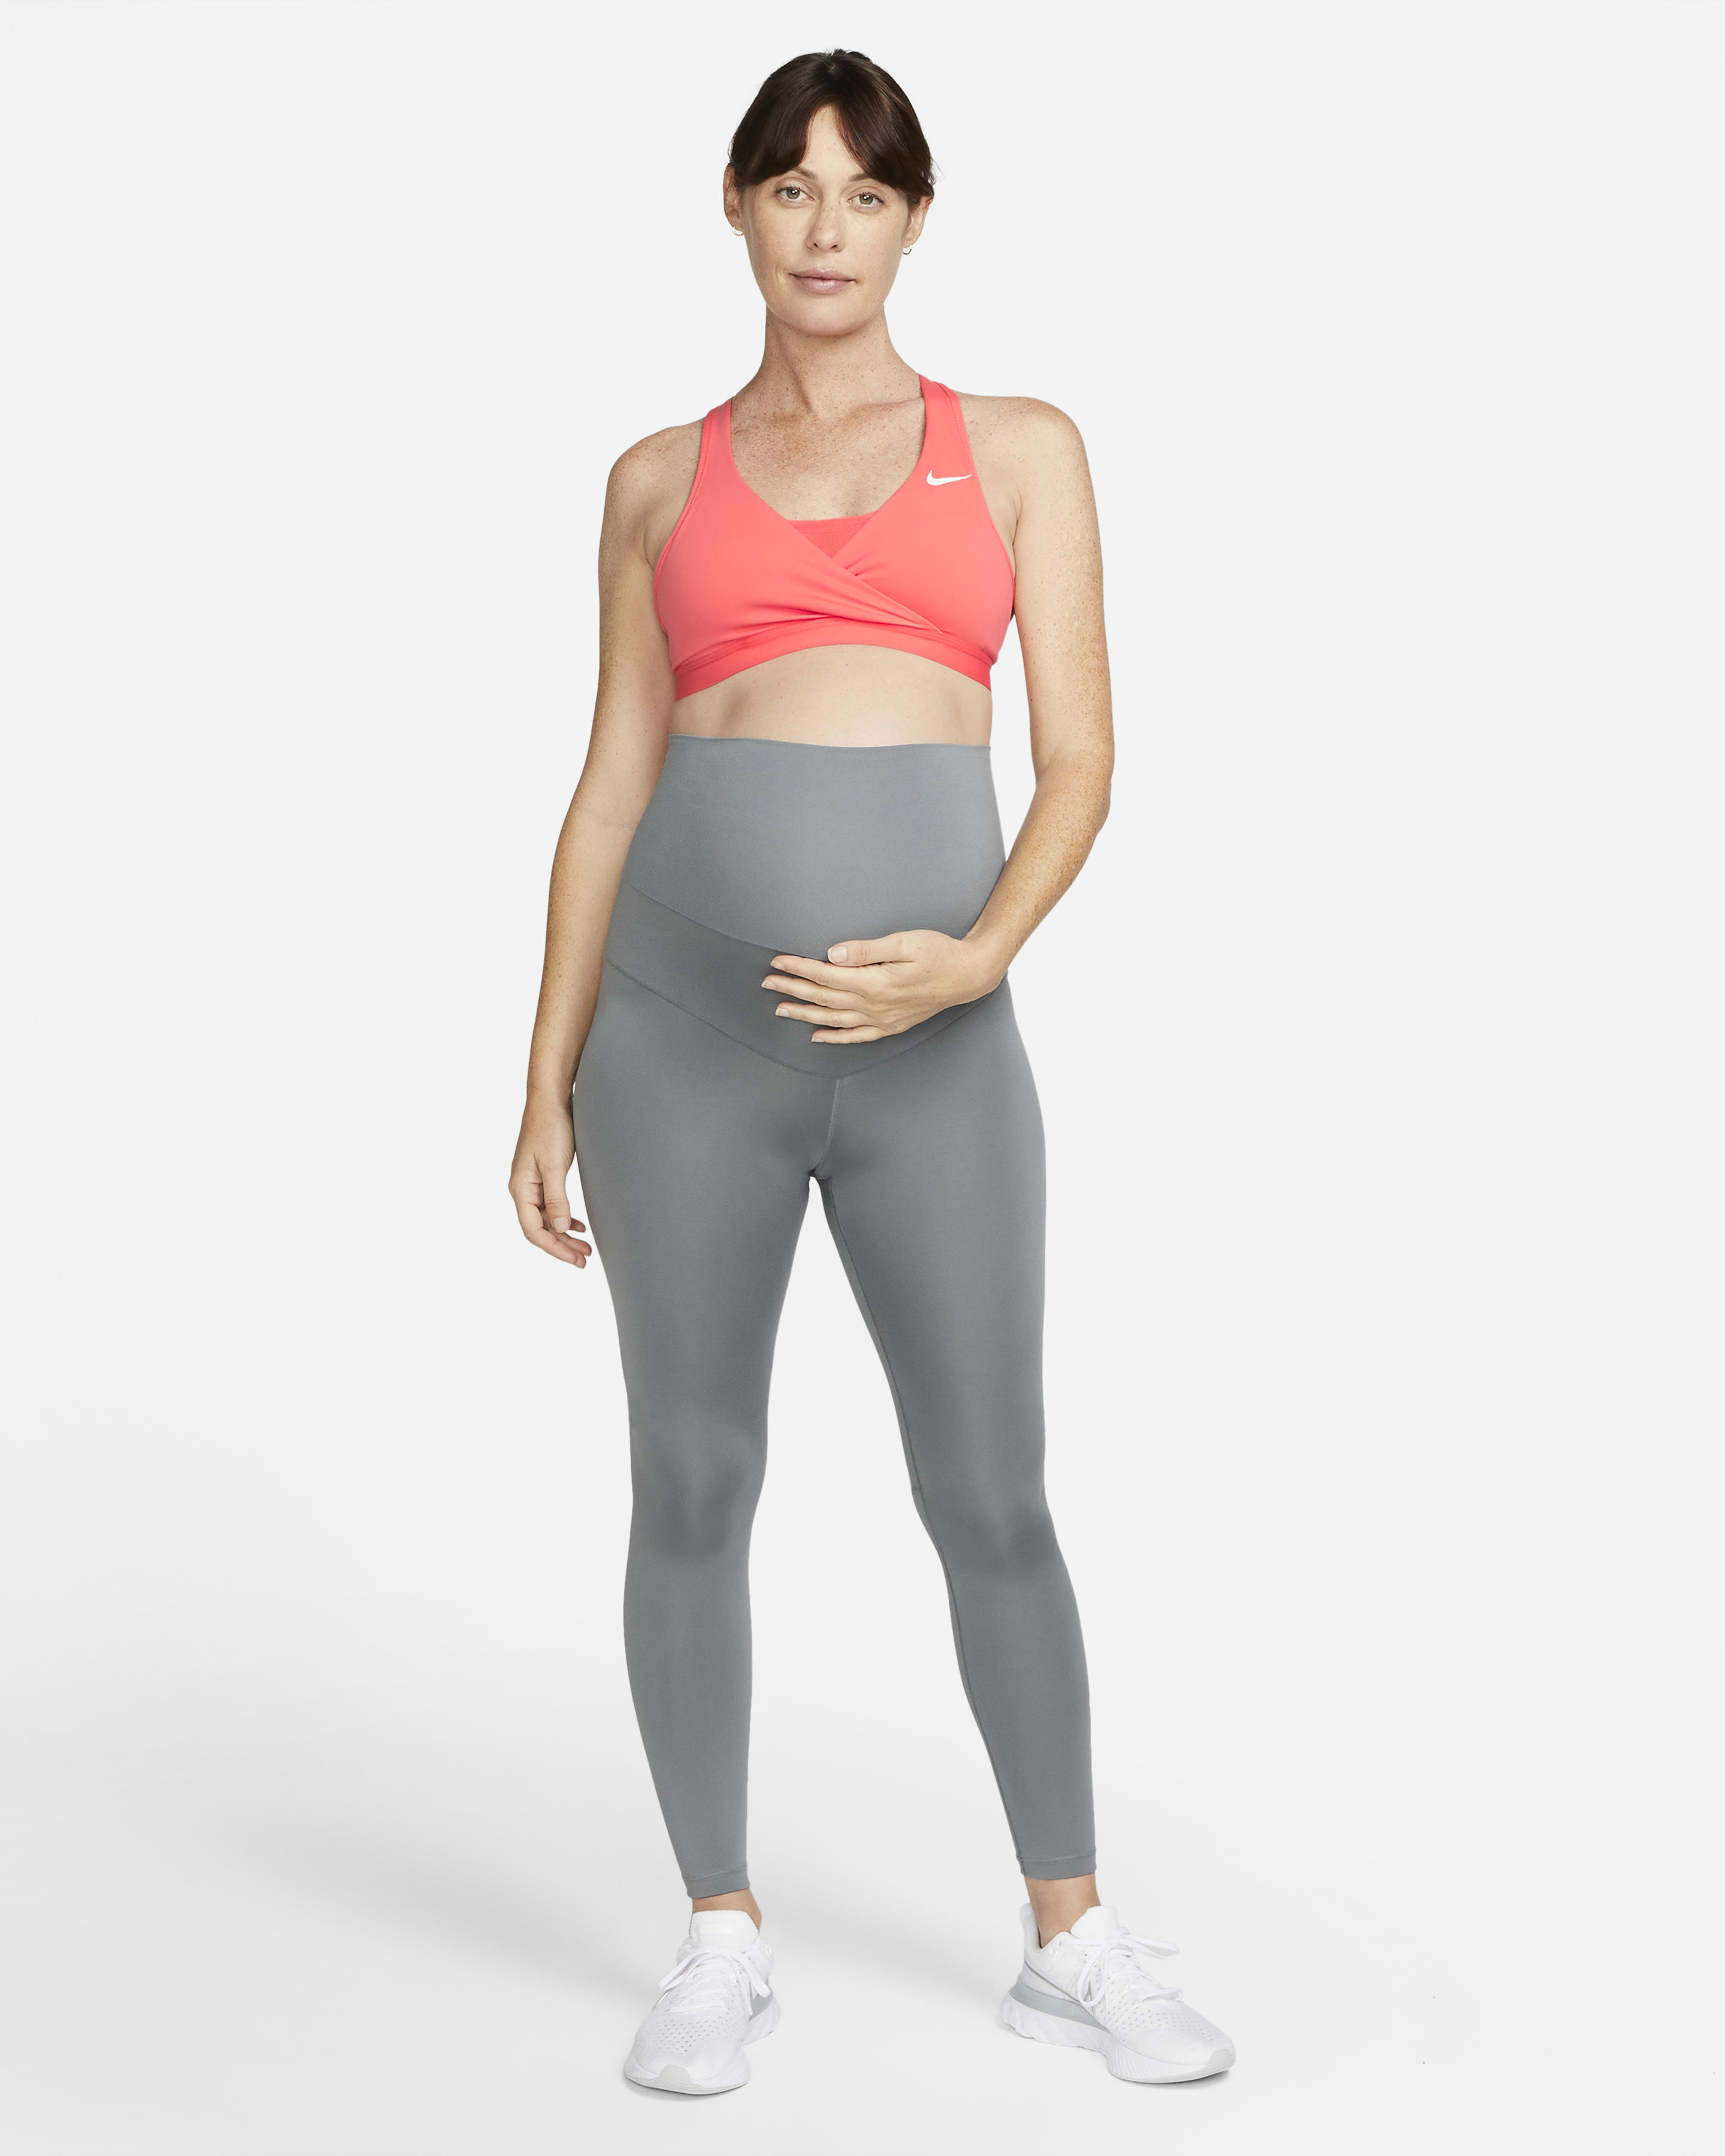 Maternity Yoga Clothes: What to Wear When Pregnant. Nike CA